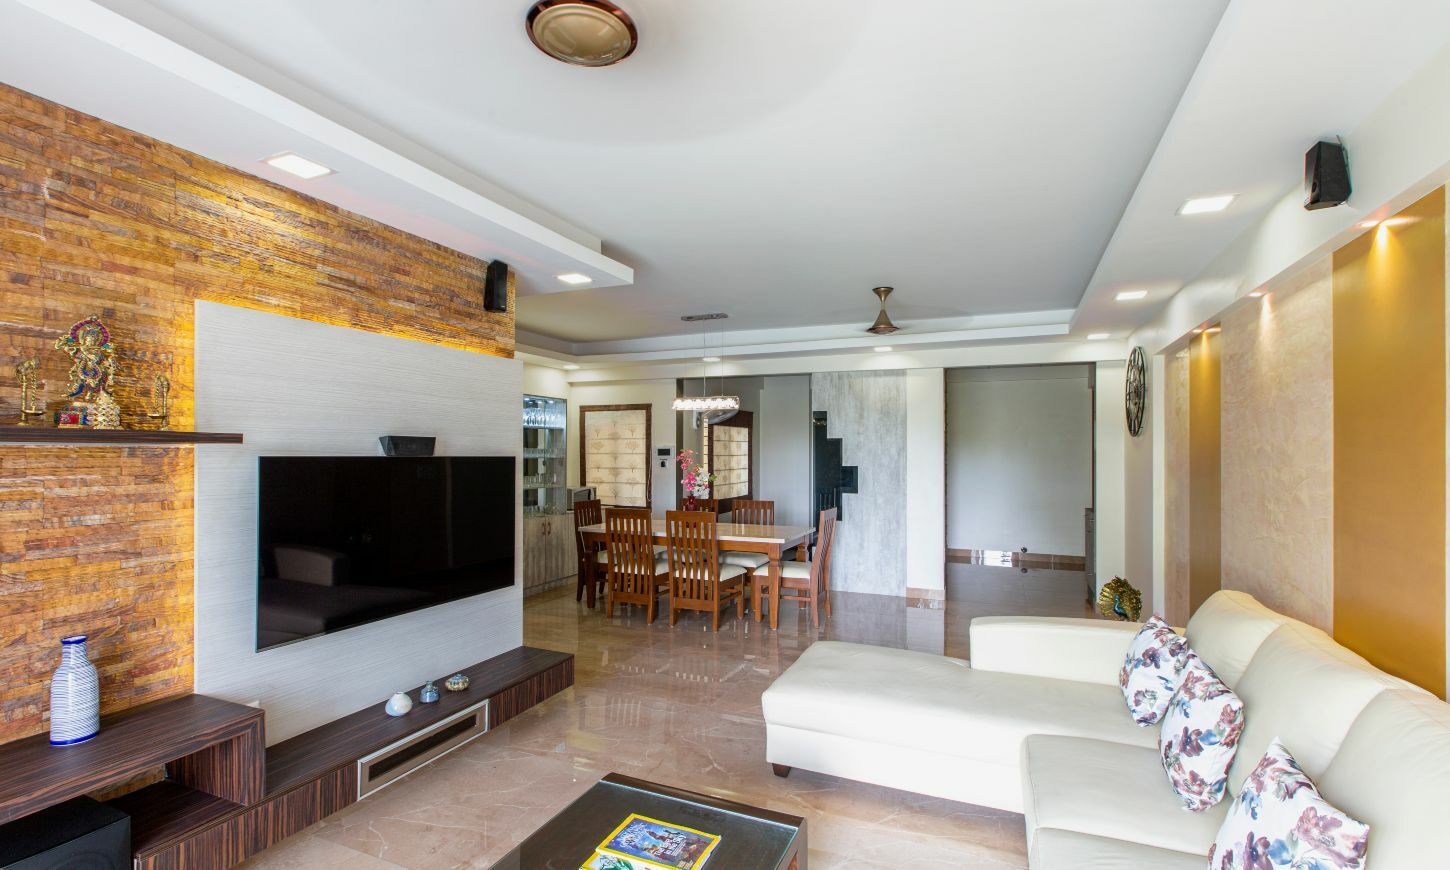 residential interior designers bangalore for living room with an open kitchen